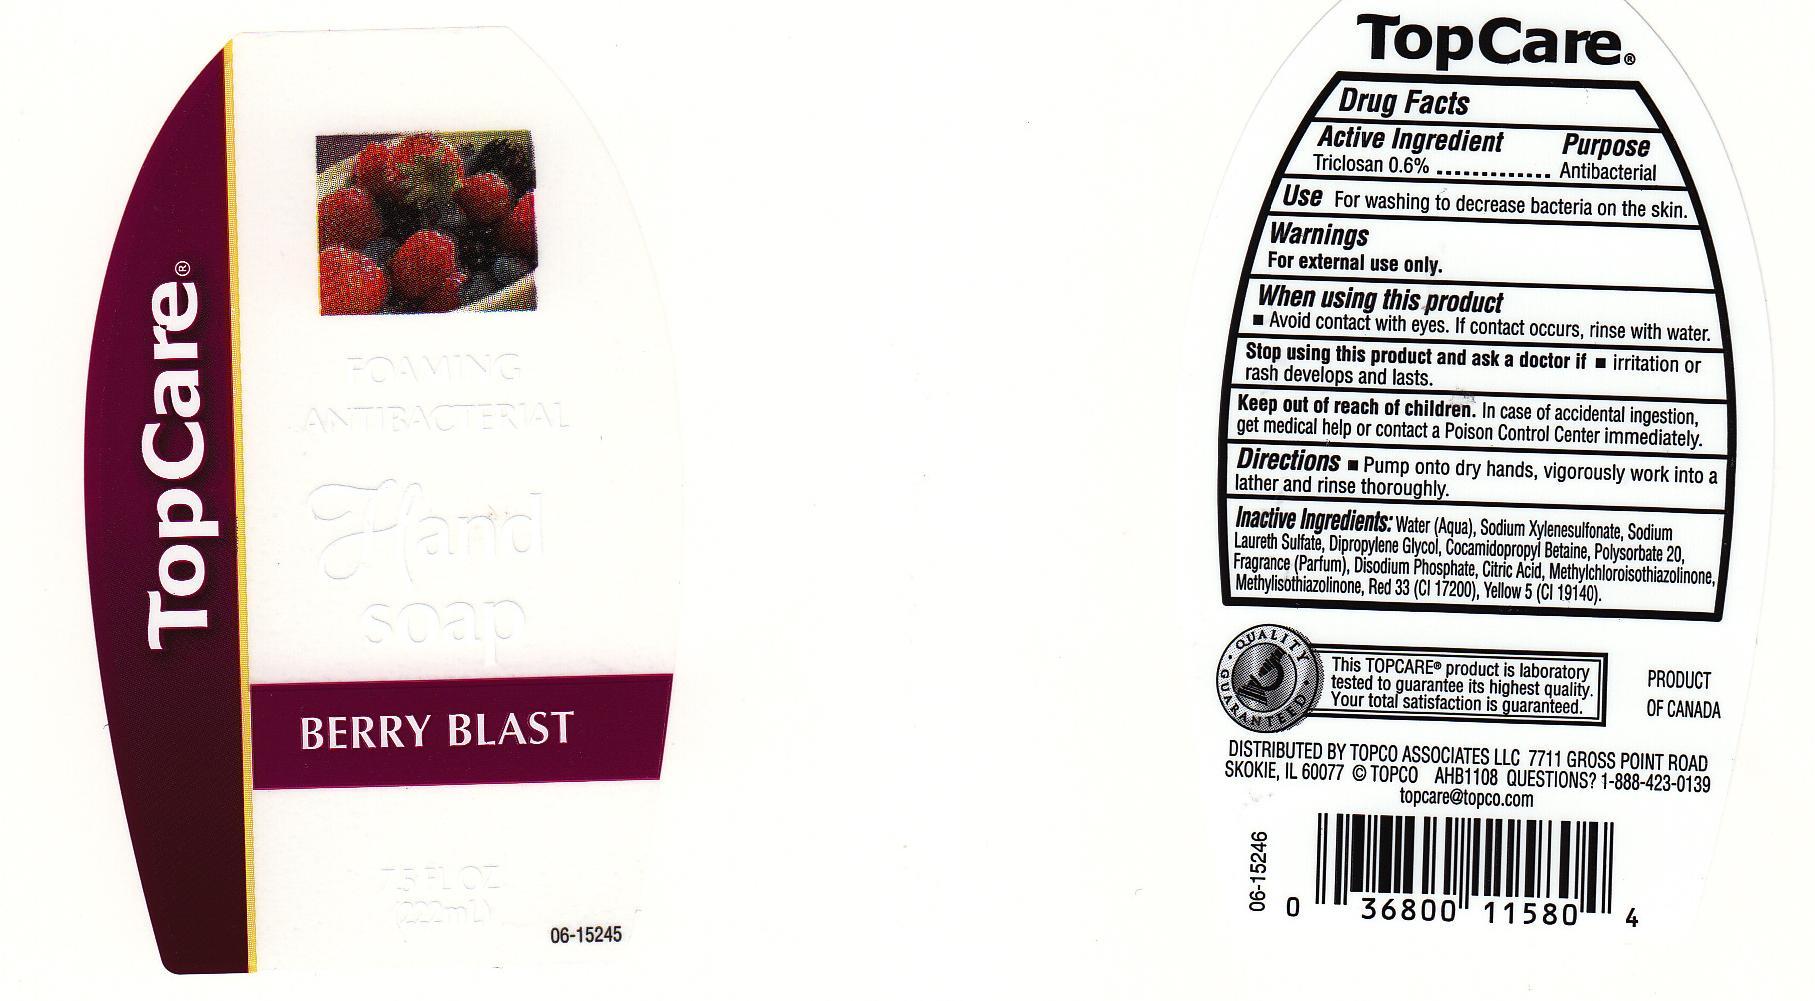 IMAGE OF LABEL